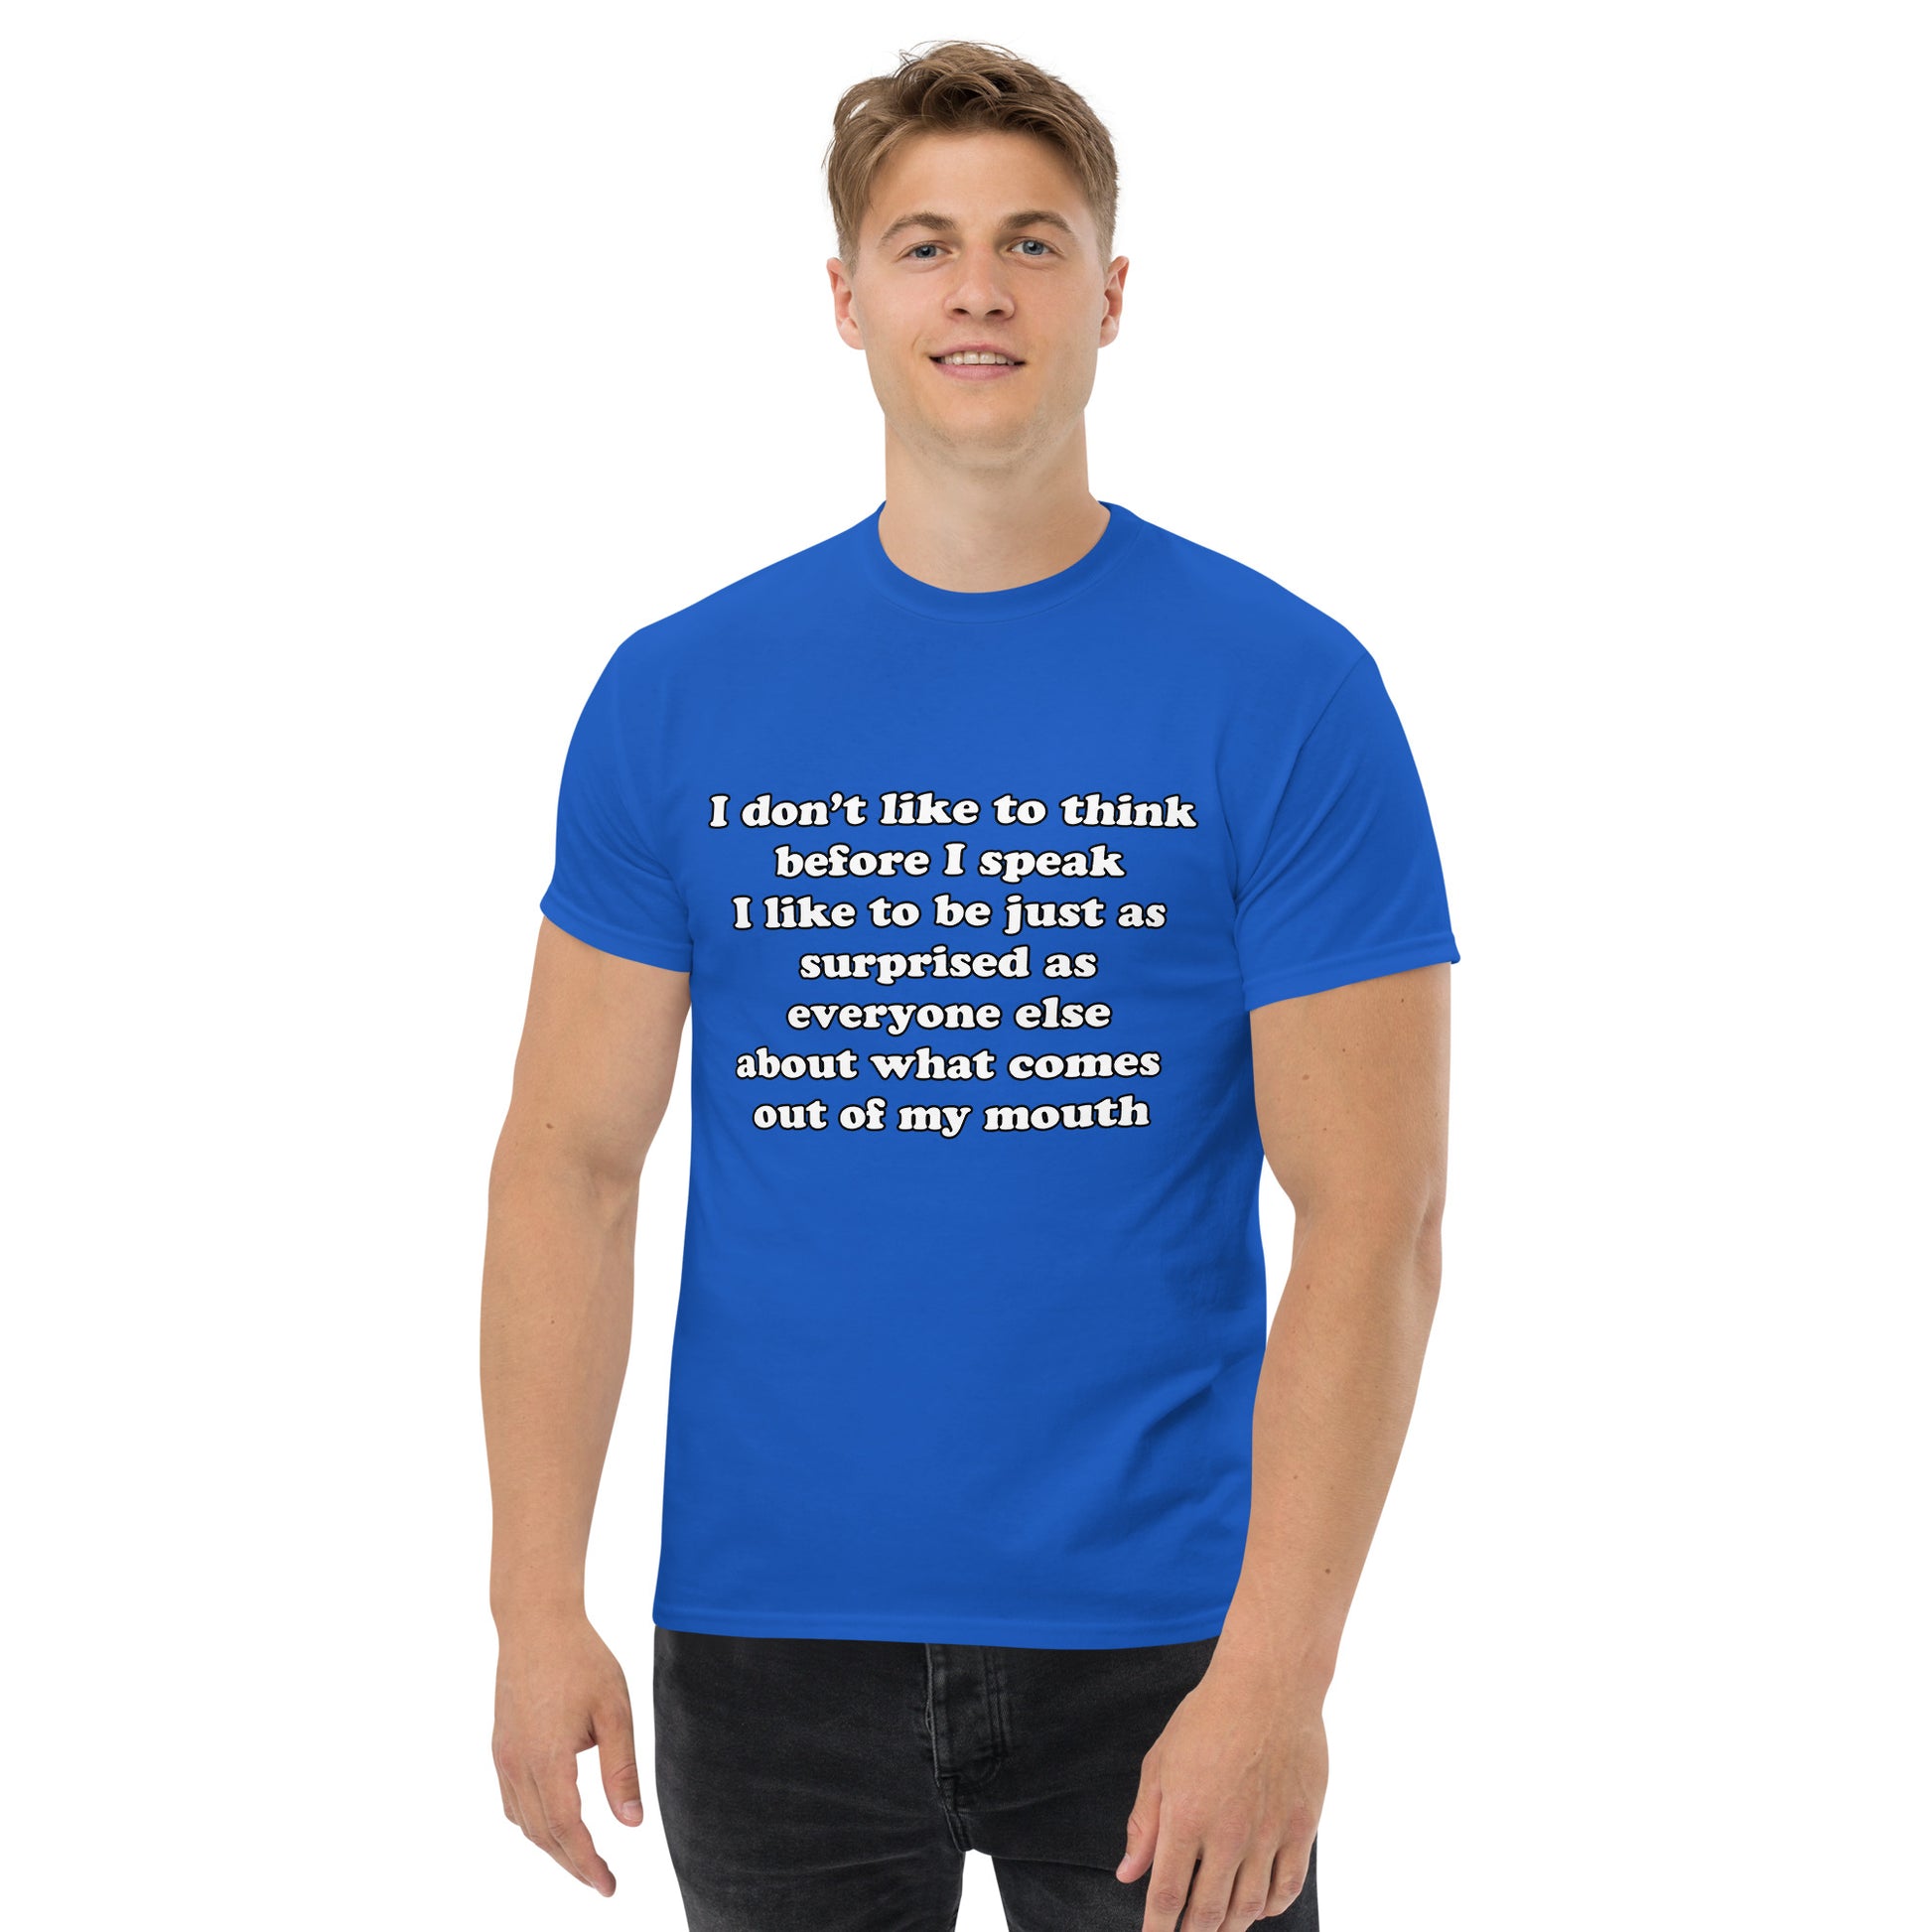 Man with royal blue t-shirt with text “I don't think before I speak Just as serprised as everyone about what comes out of my mouth"